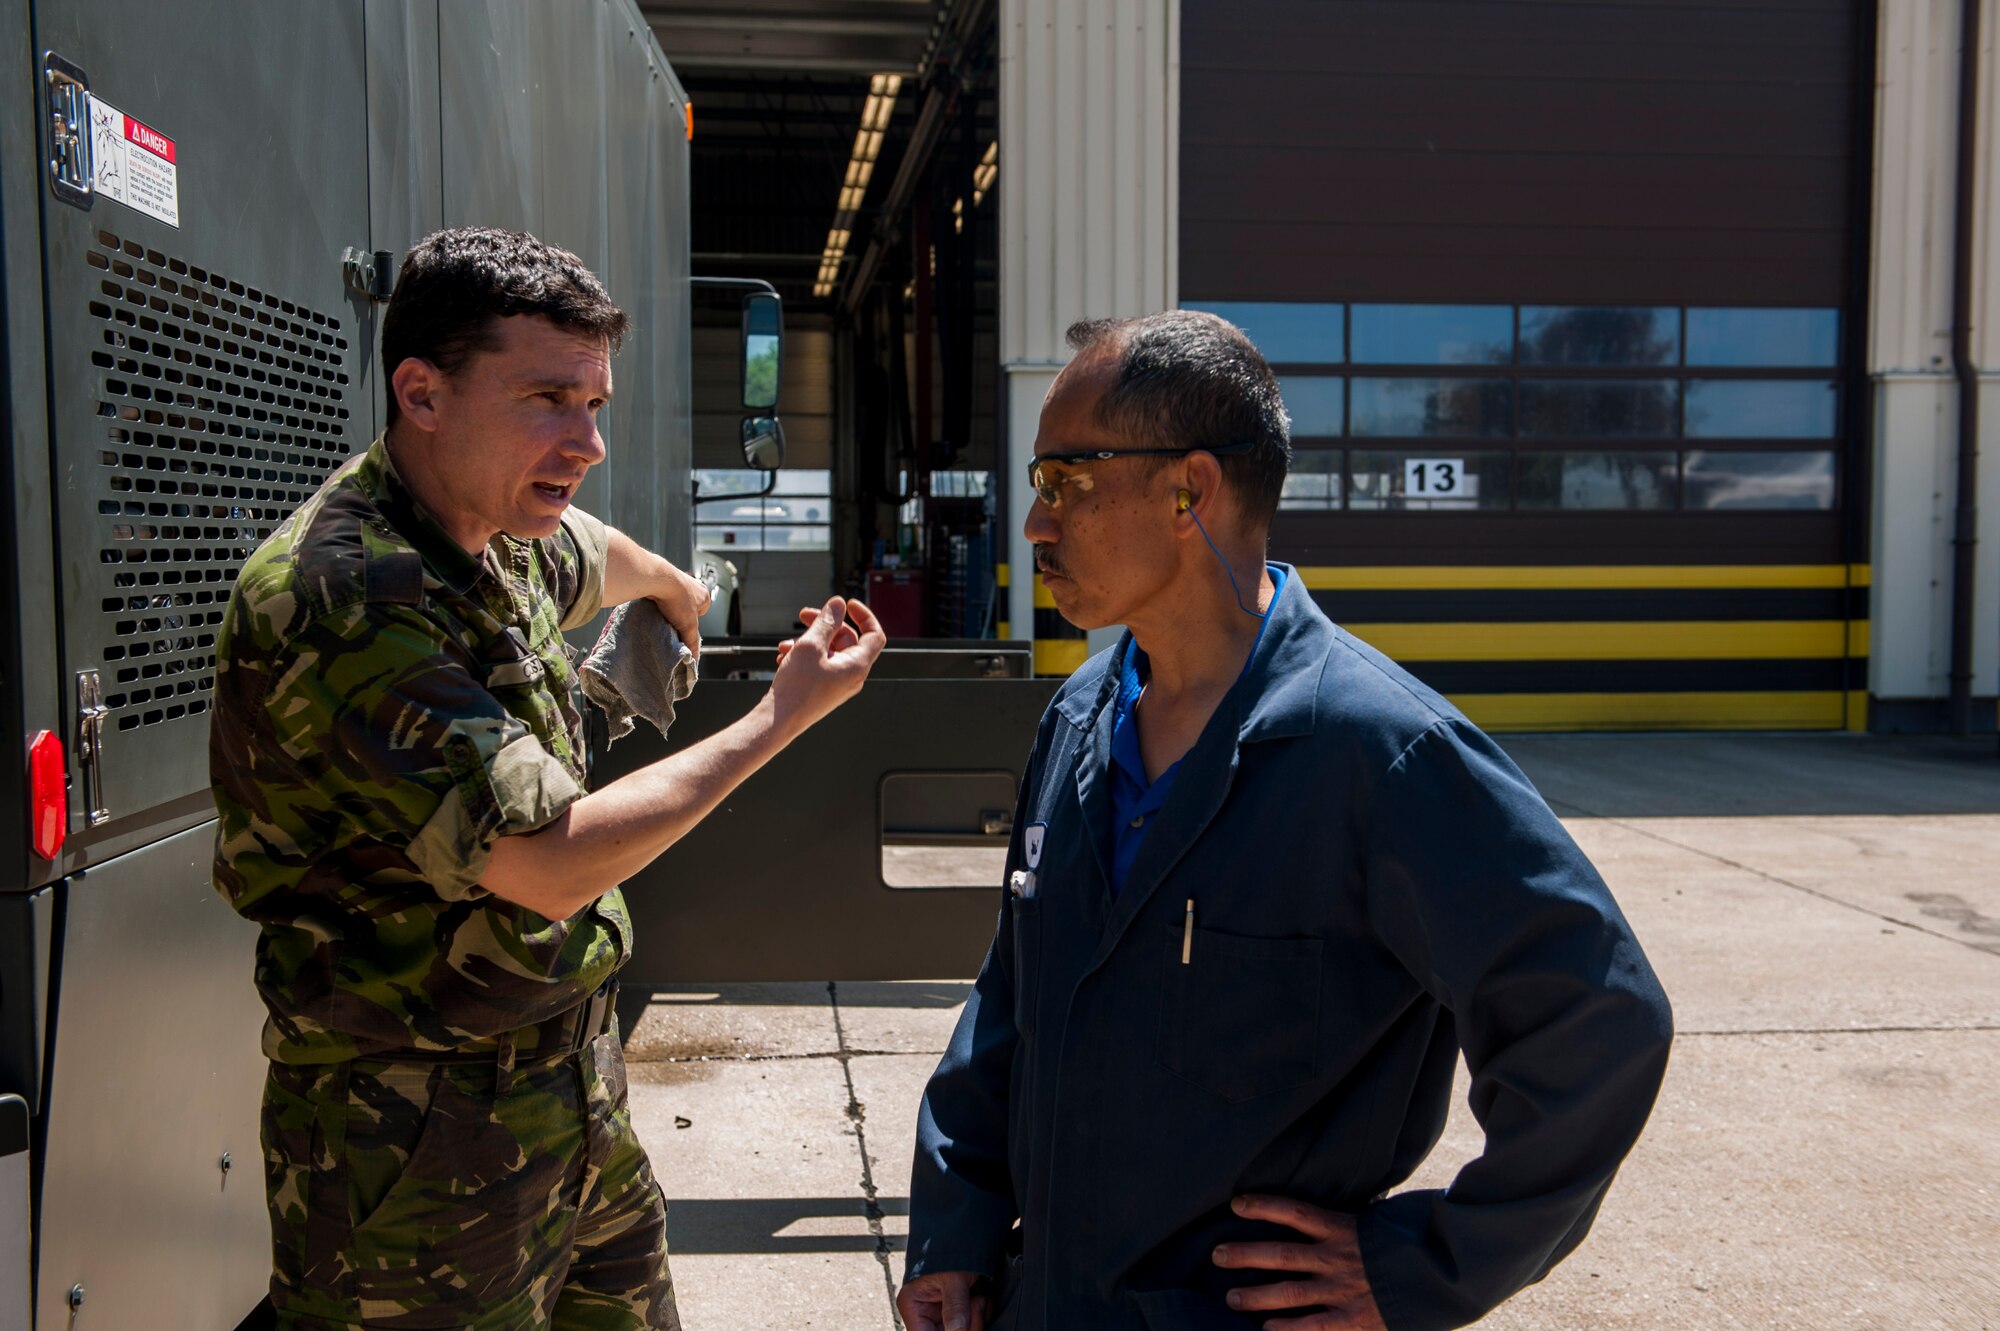 Romanian Land Forces Warrant Officer Bogden Cosma, Heavy Airlift Wing vehicle maintenance NCO-in-charge assigned to Papa Air Base, Hungary, left, speaks with Pedro Sagisi, the aircraft deicer qualification training course instructor, during the lab portion of the course at the European Transportation Training Center on Spangdahlem Air Base, Germany, June 9, 2016. The training course took 10 business days, subjecting students to the academics and hands-on portion of becoming experts in maintaining the deicer truck. (U.S. Air Force photo by Airman 1st Class Timothy Kim/Released)